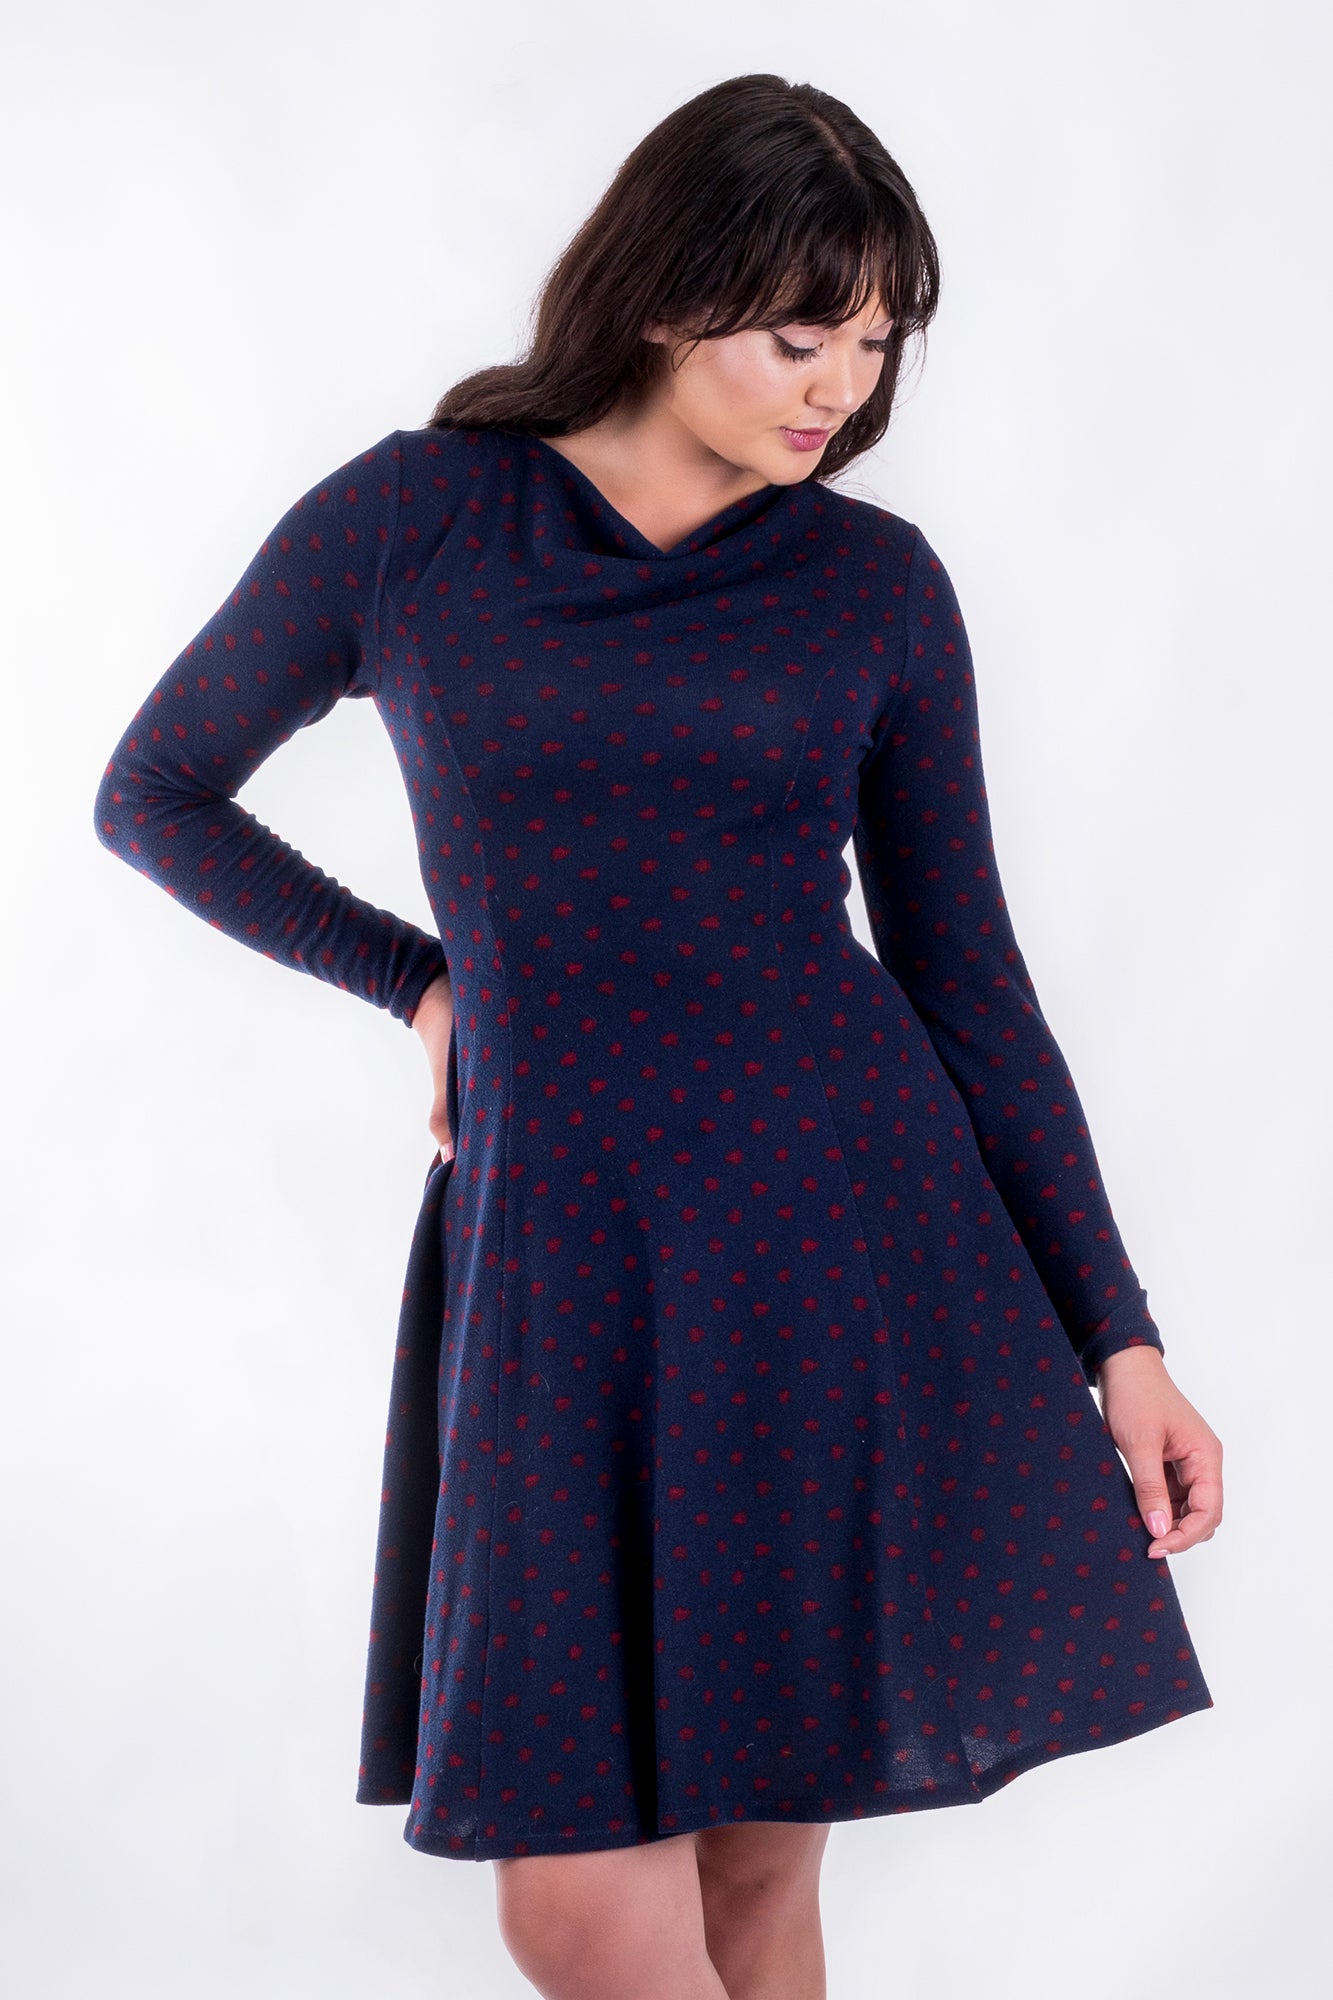 Knit sheath dress sewing pattern. Print and download it today.